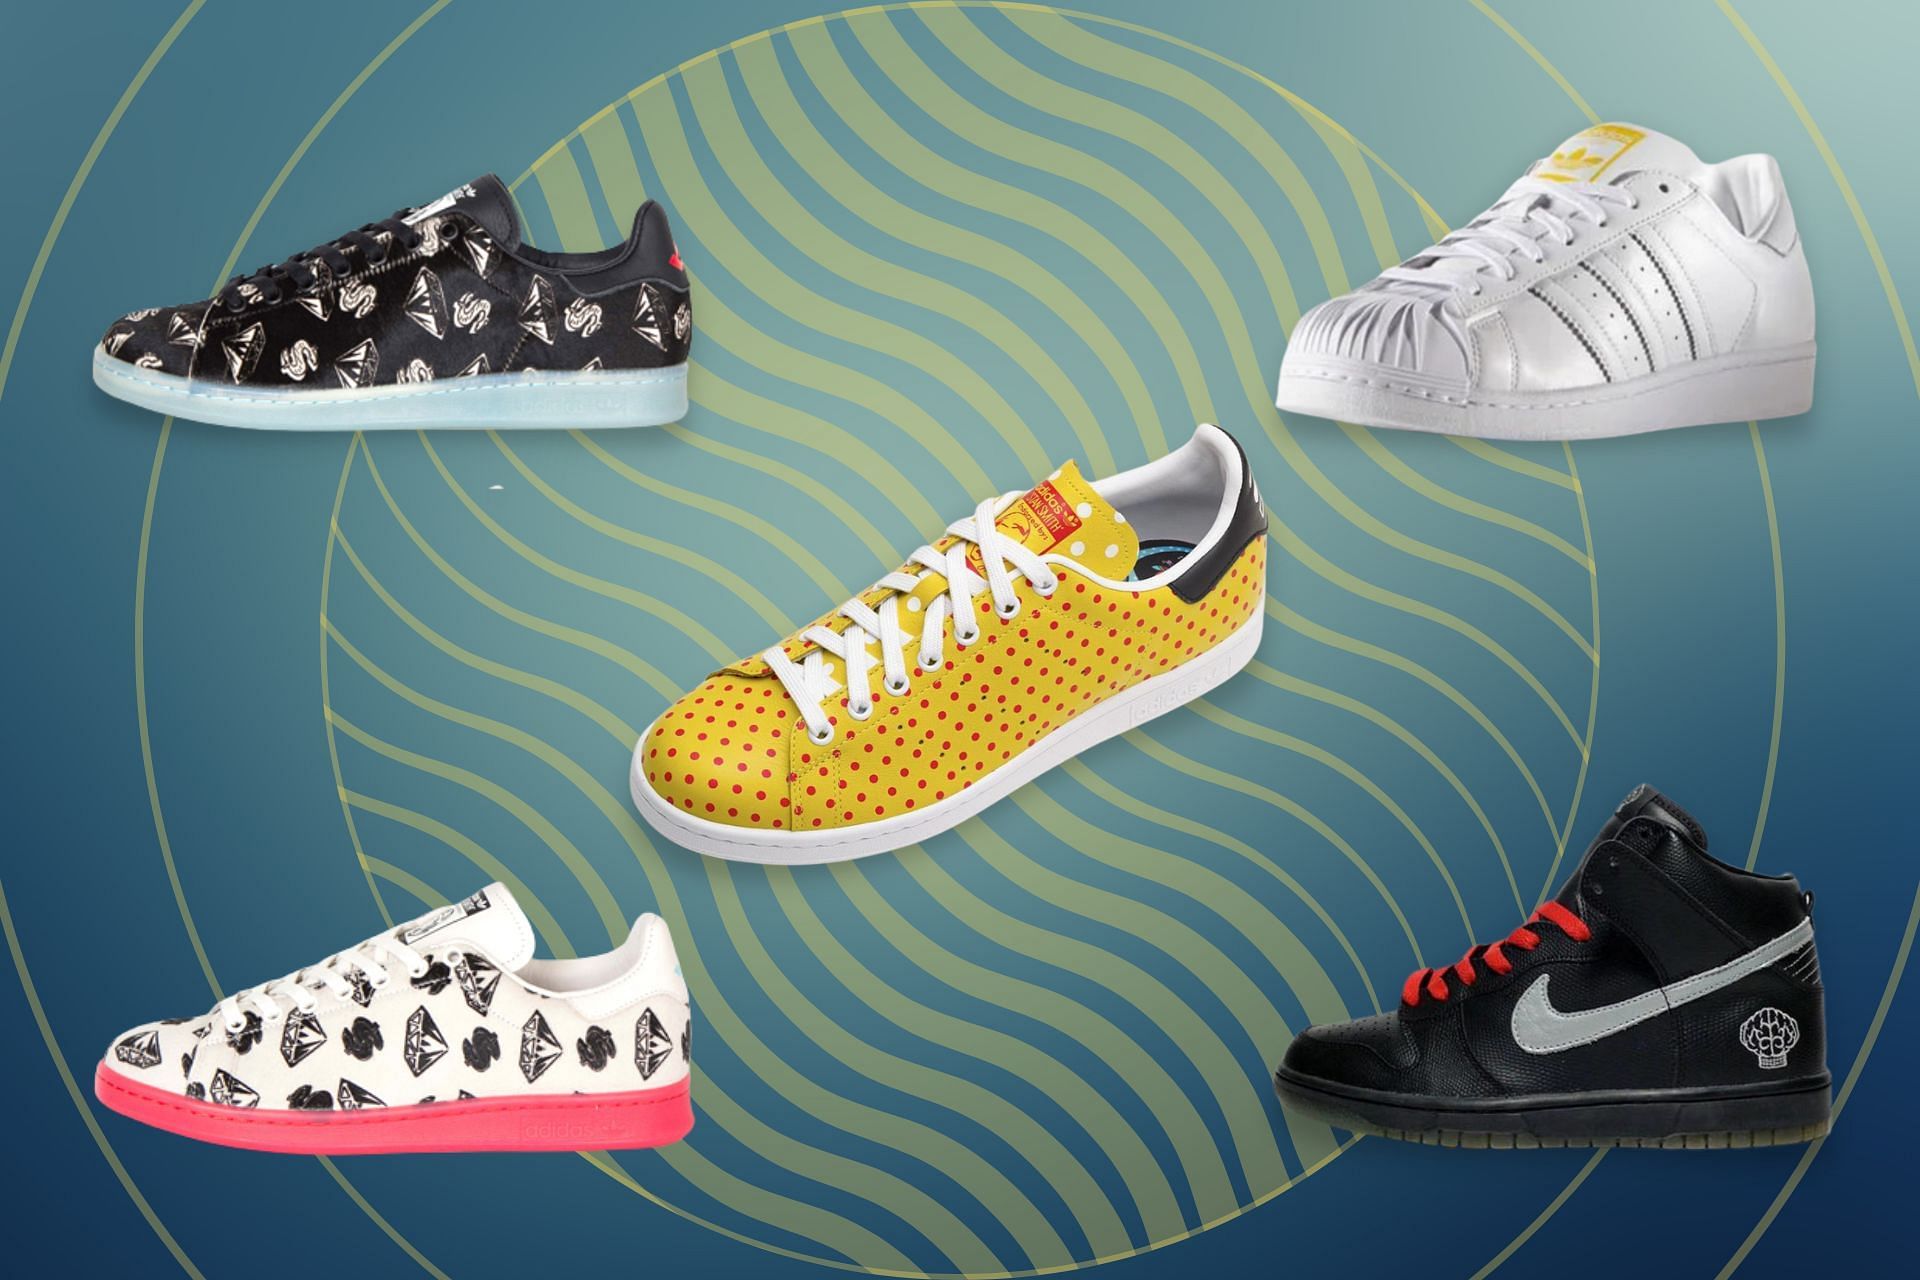 Top 5 Pharrell Williams sneaker collabs of all time